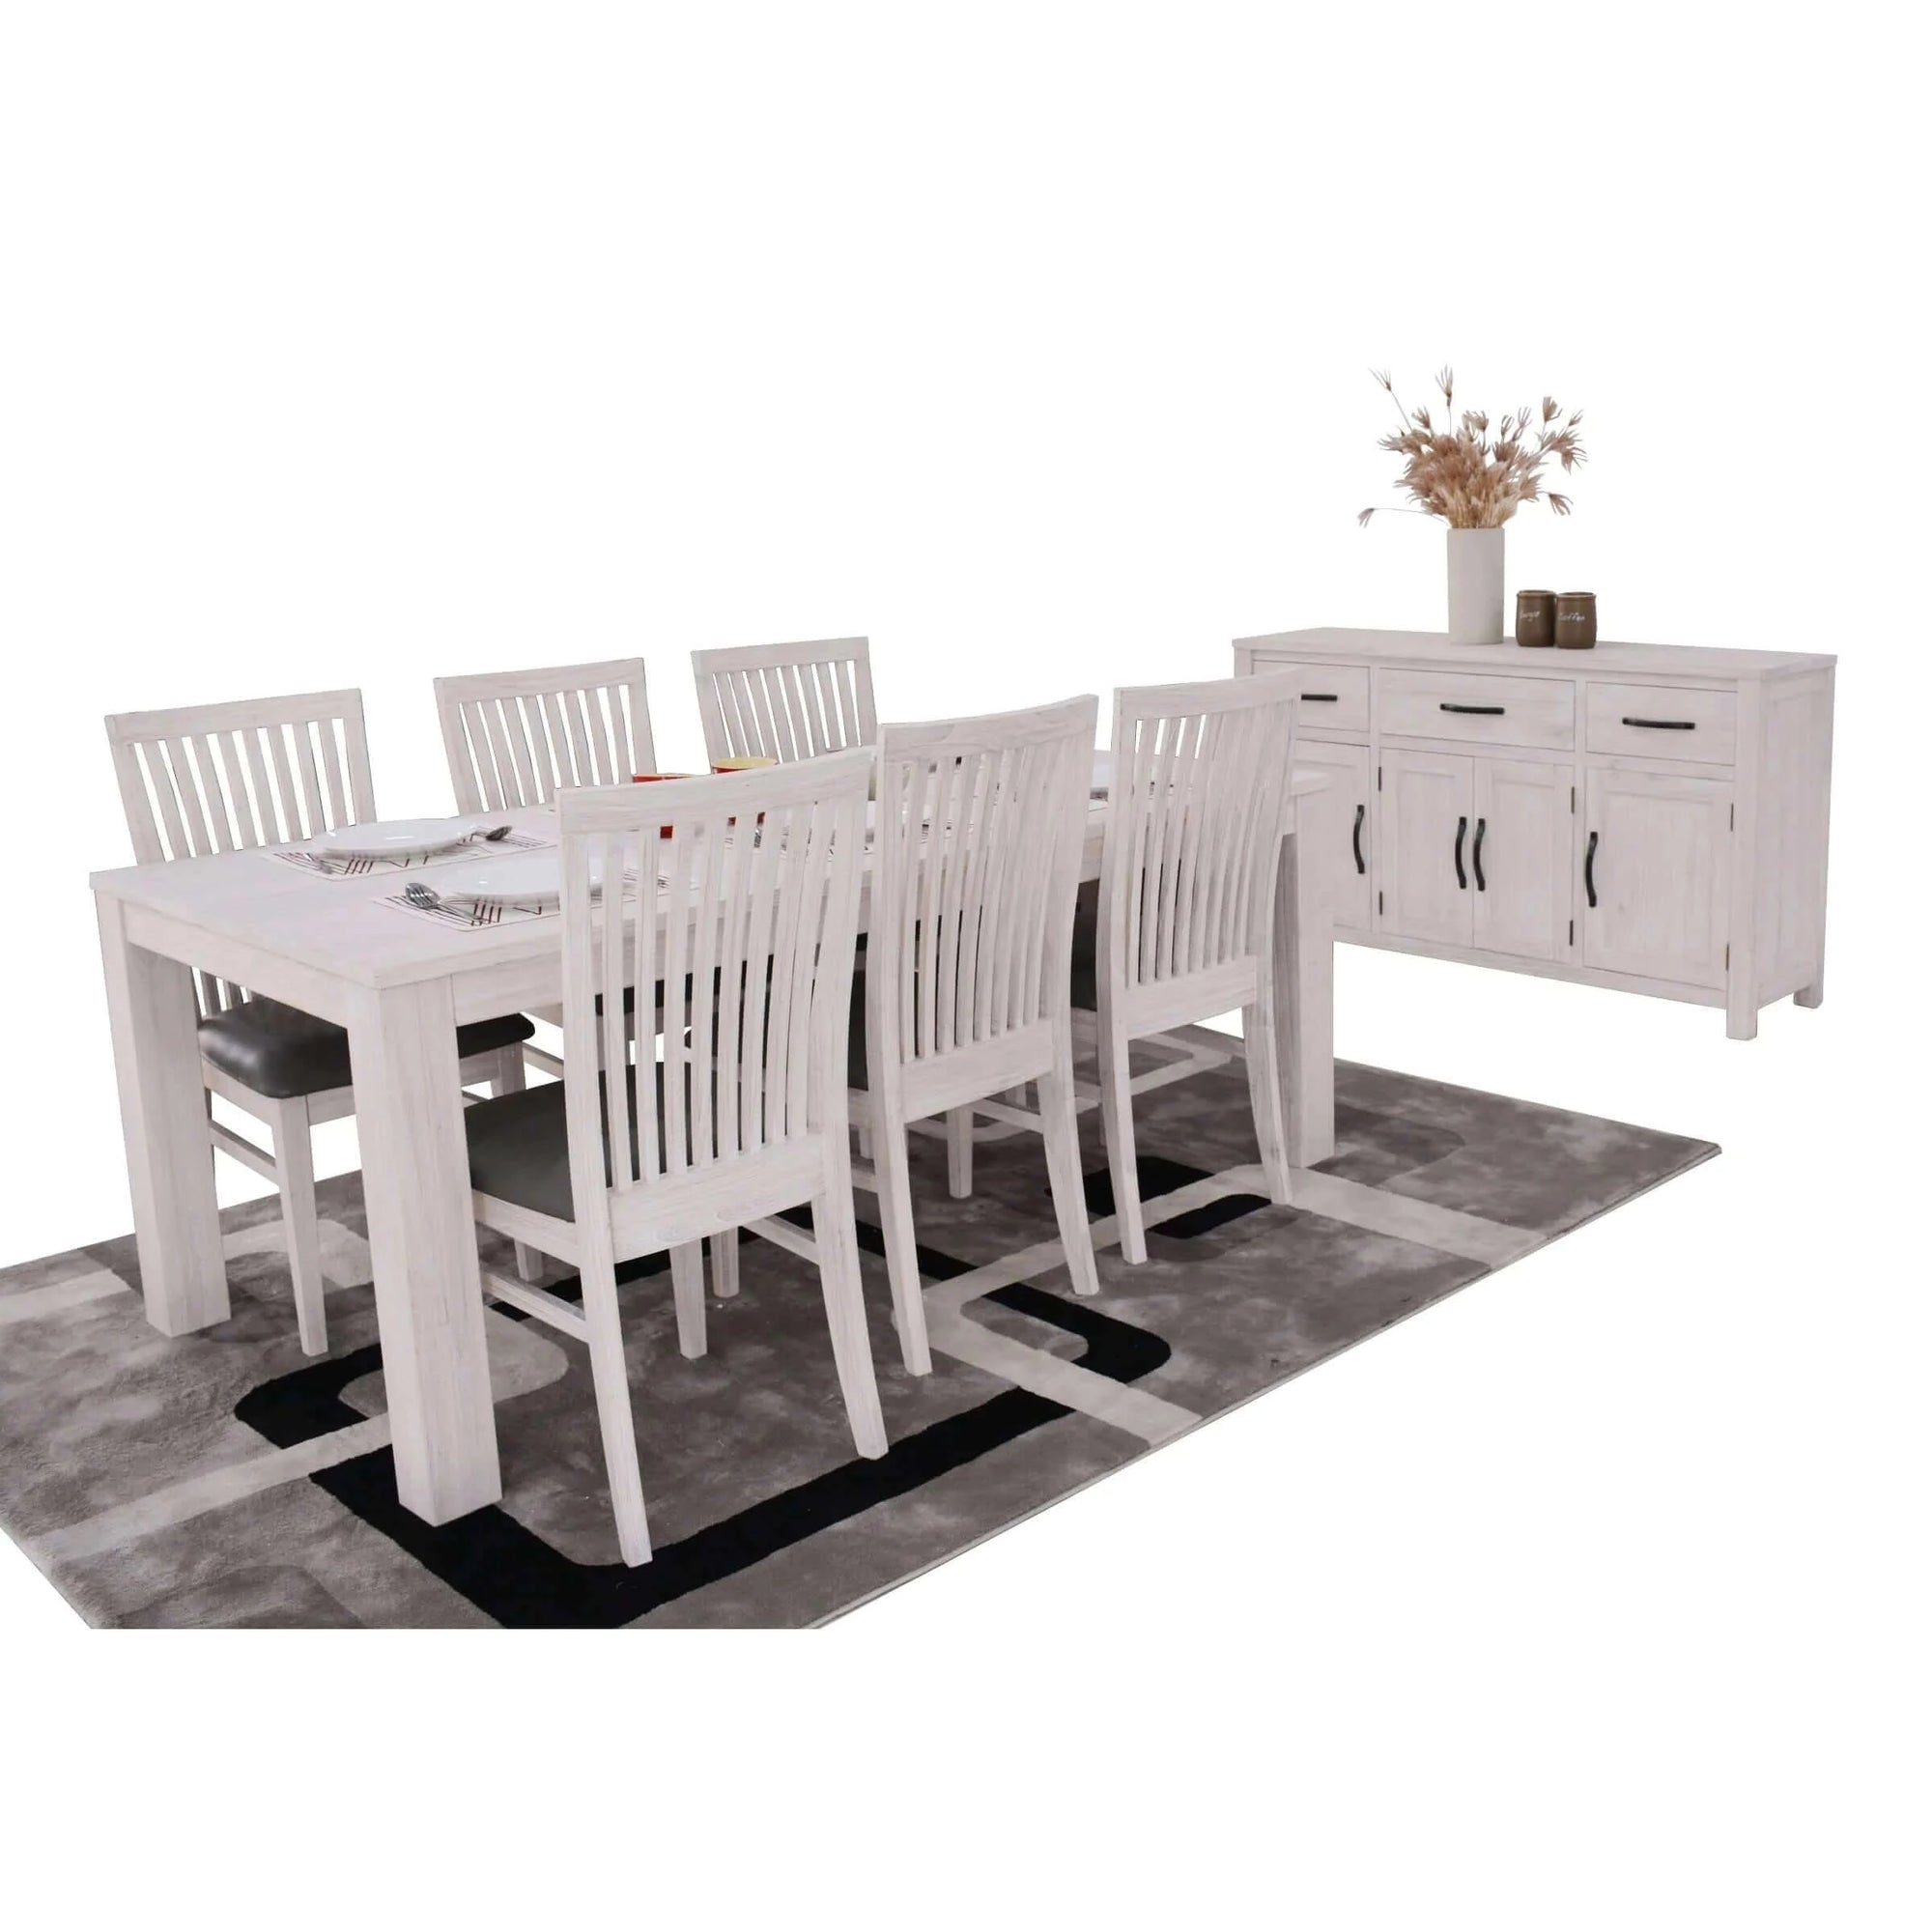 Buy foxglove 7pc dining set 190cm table 6 pu seat chair solid mt ash wood - white - upinteriors-Upinteriors